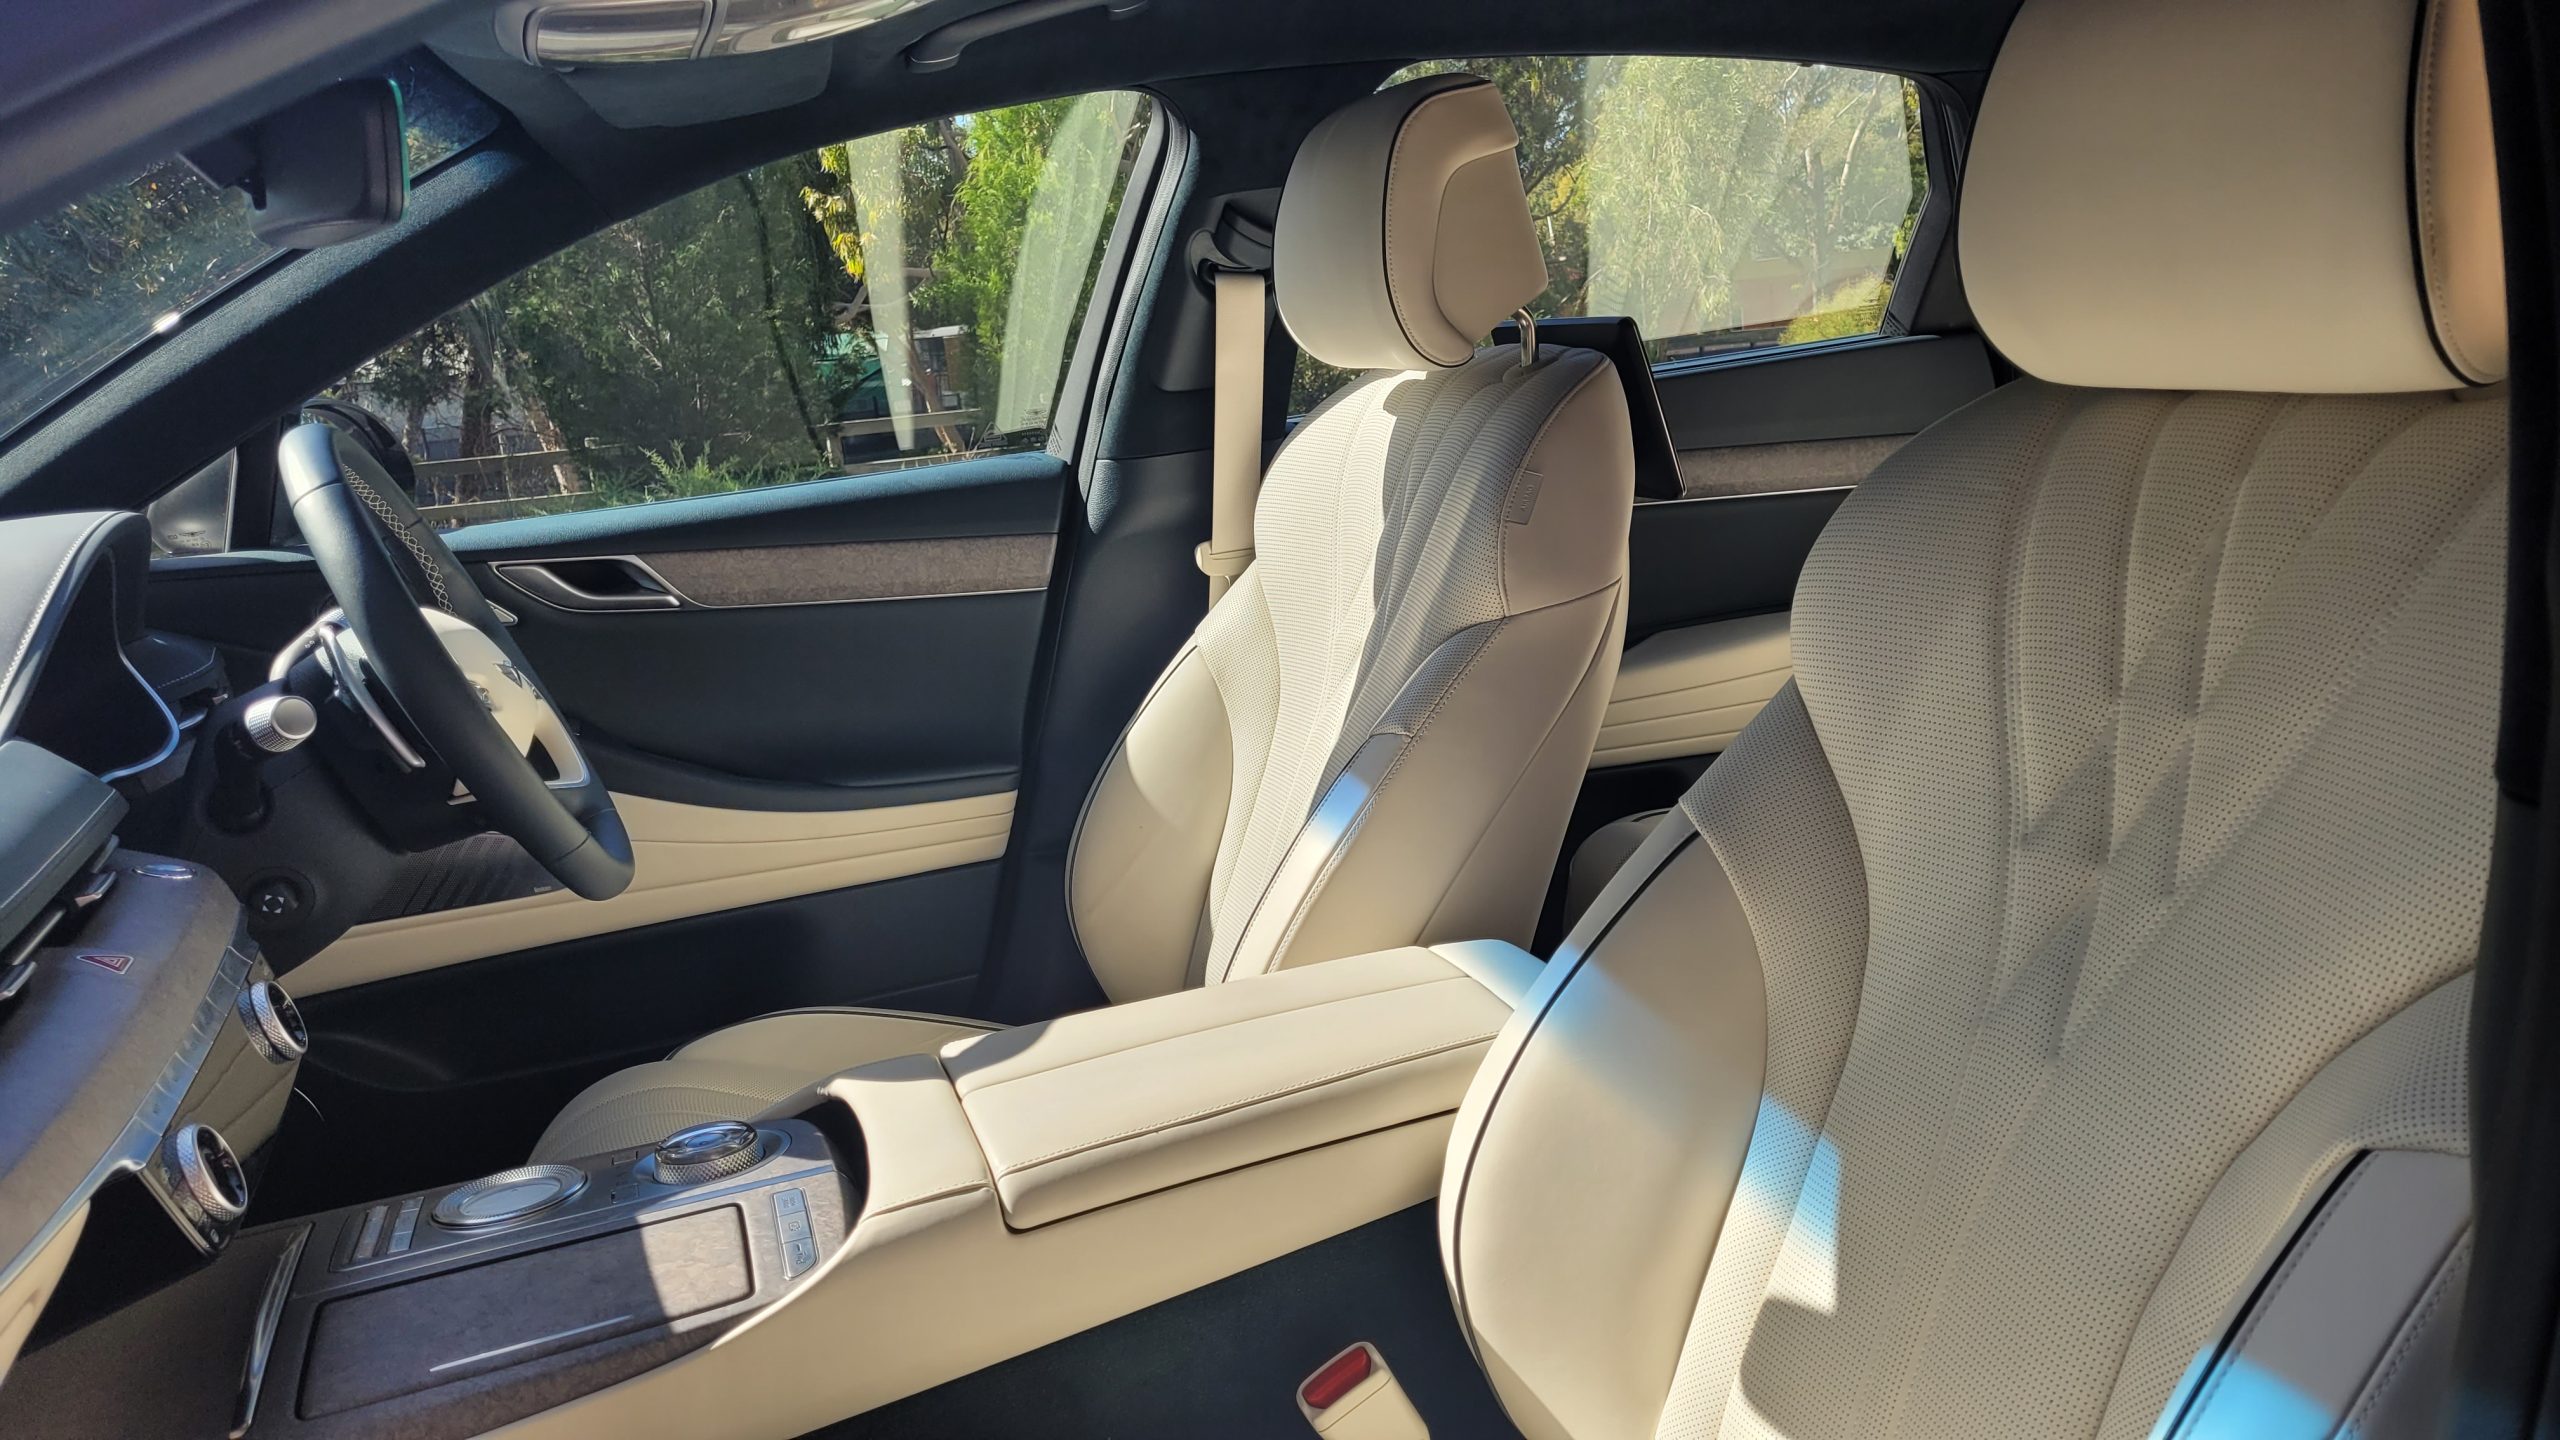 Makalu Matte Gray Genesis G80 electric vehicle cream coloured front seats and centre console from left passenger door